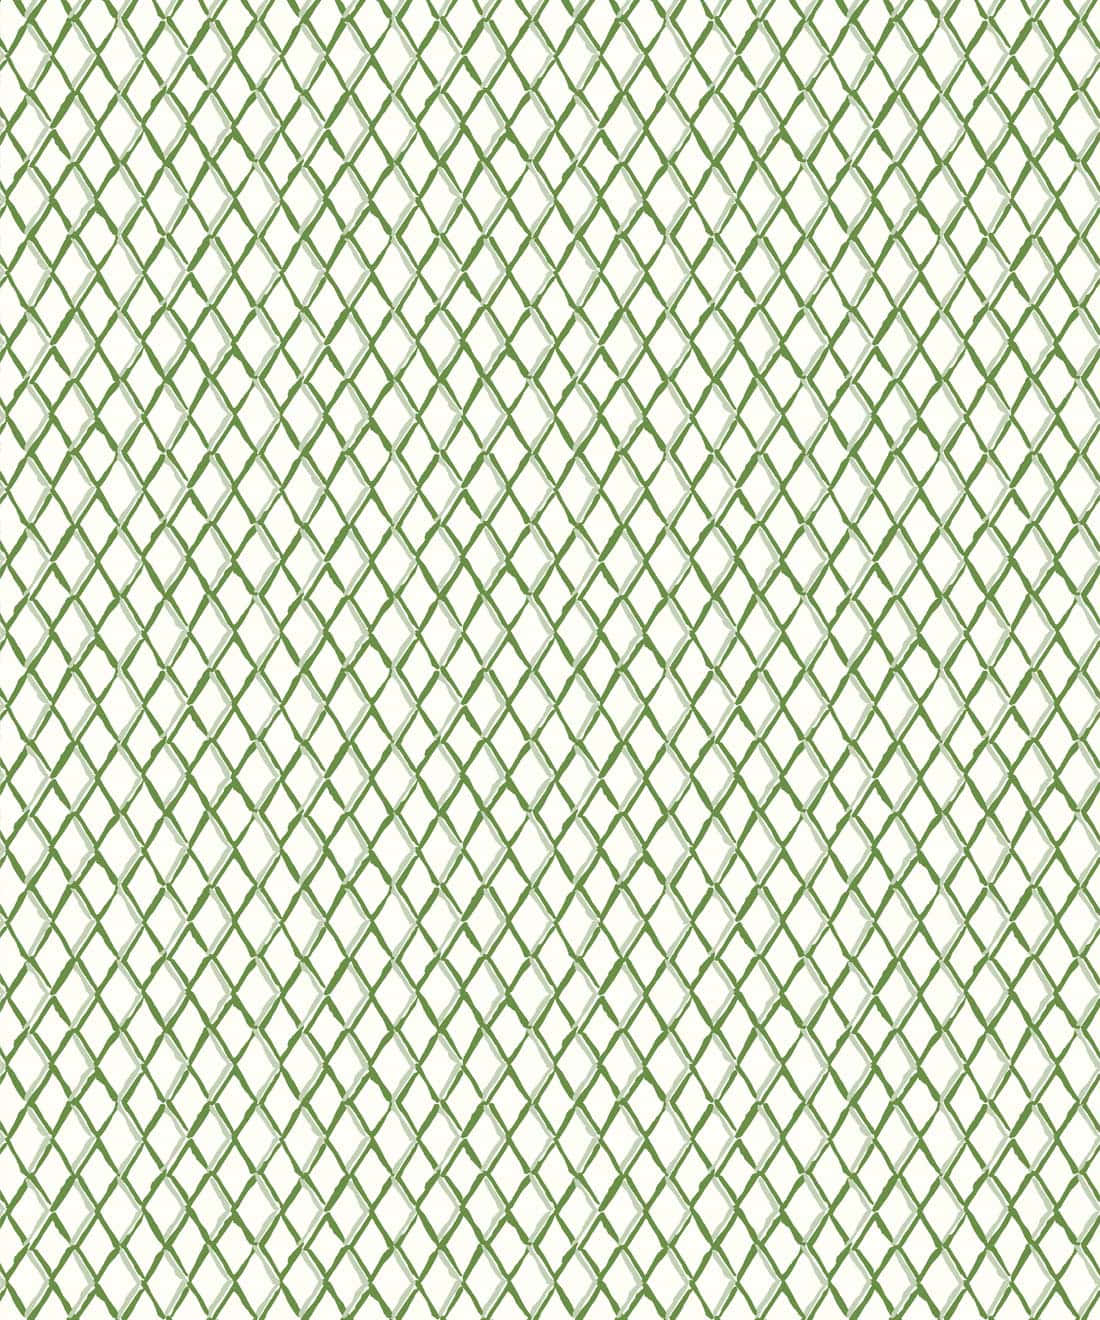 Abstract Green Wire Mesh Artwork Wallpaper